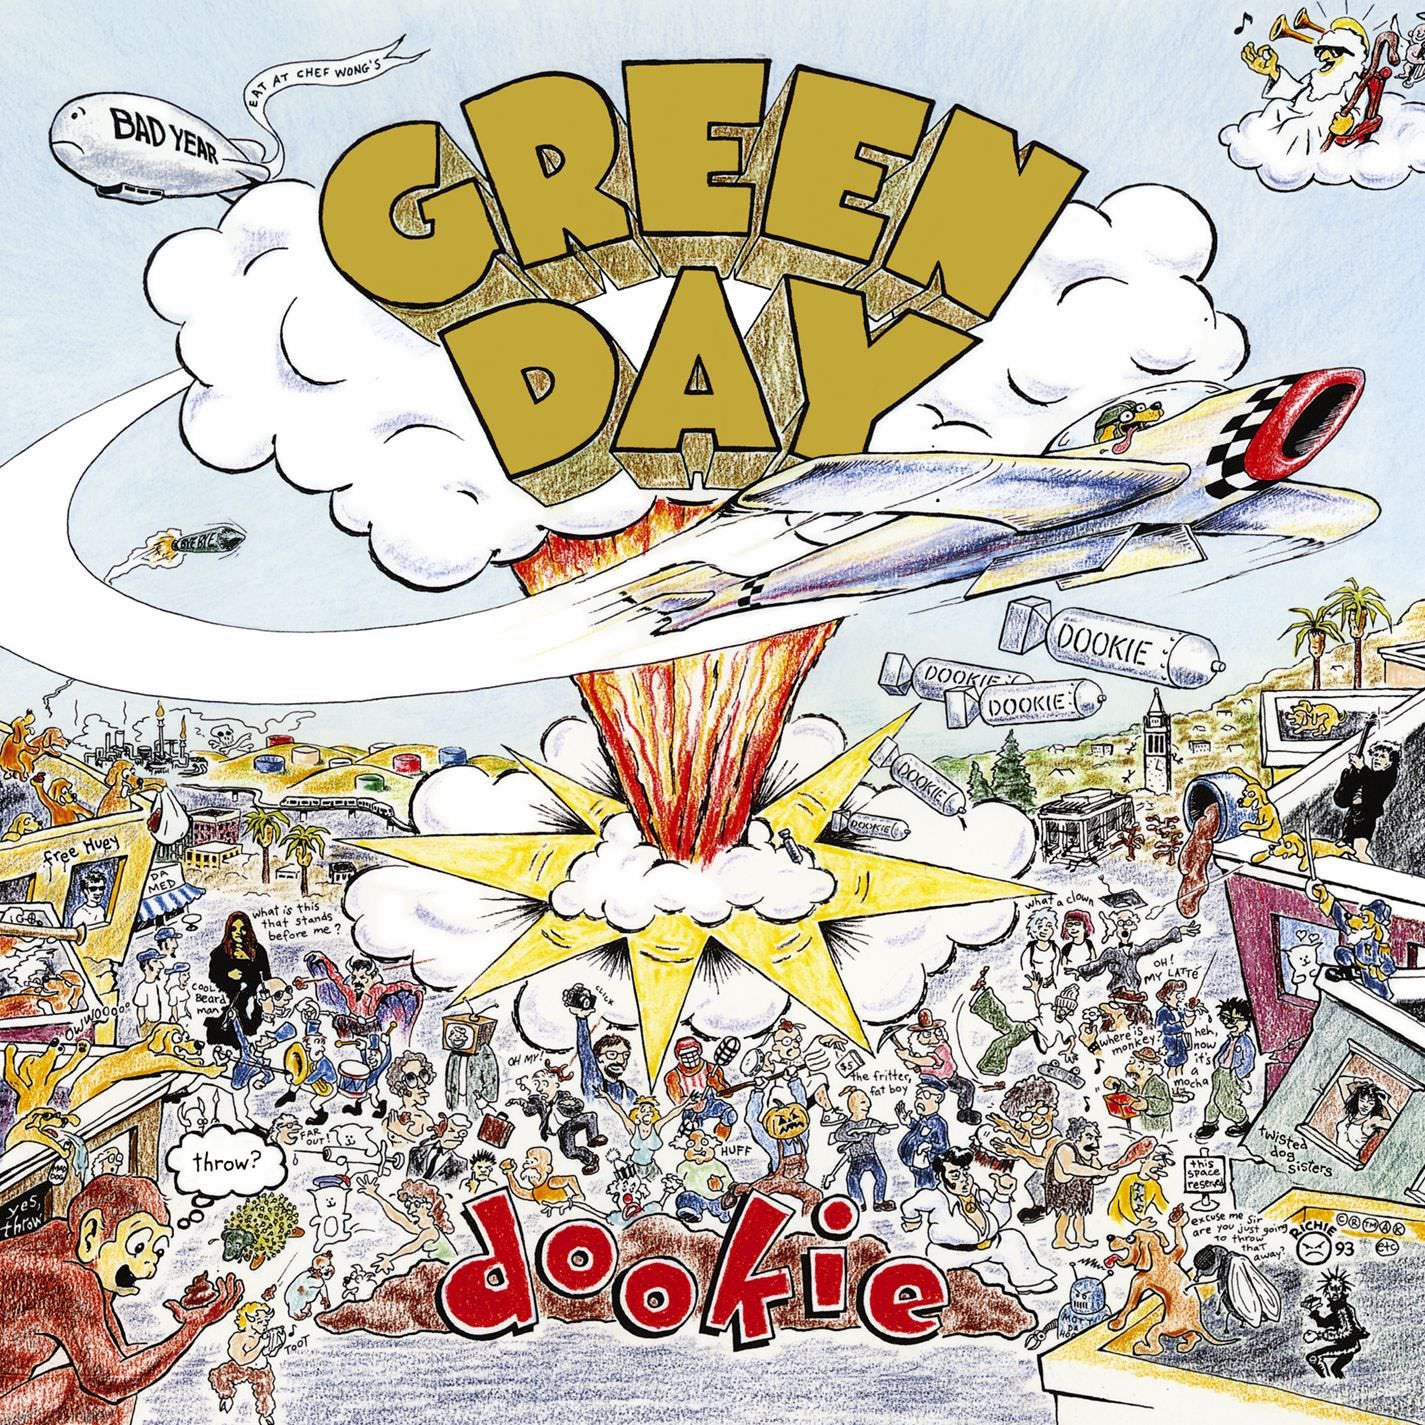 Green Day: Dookie Album cover